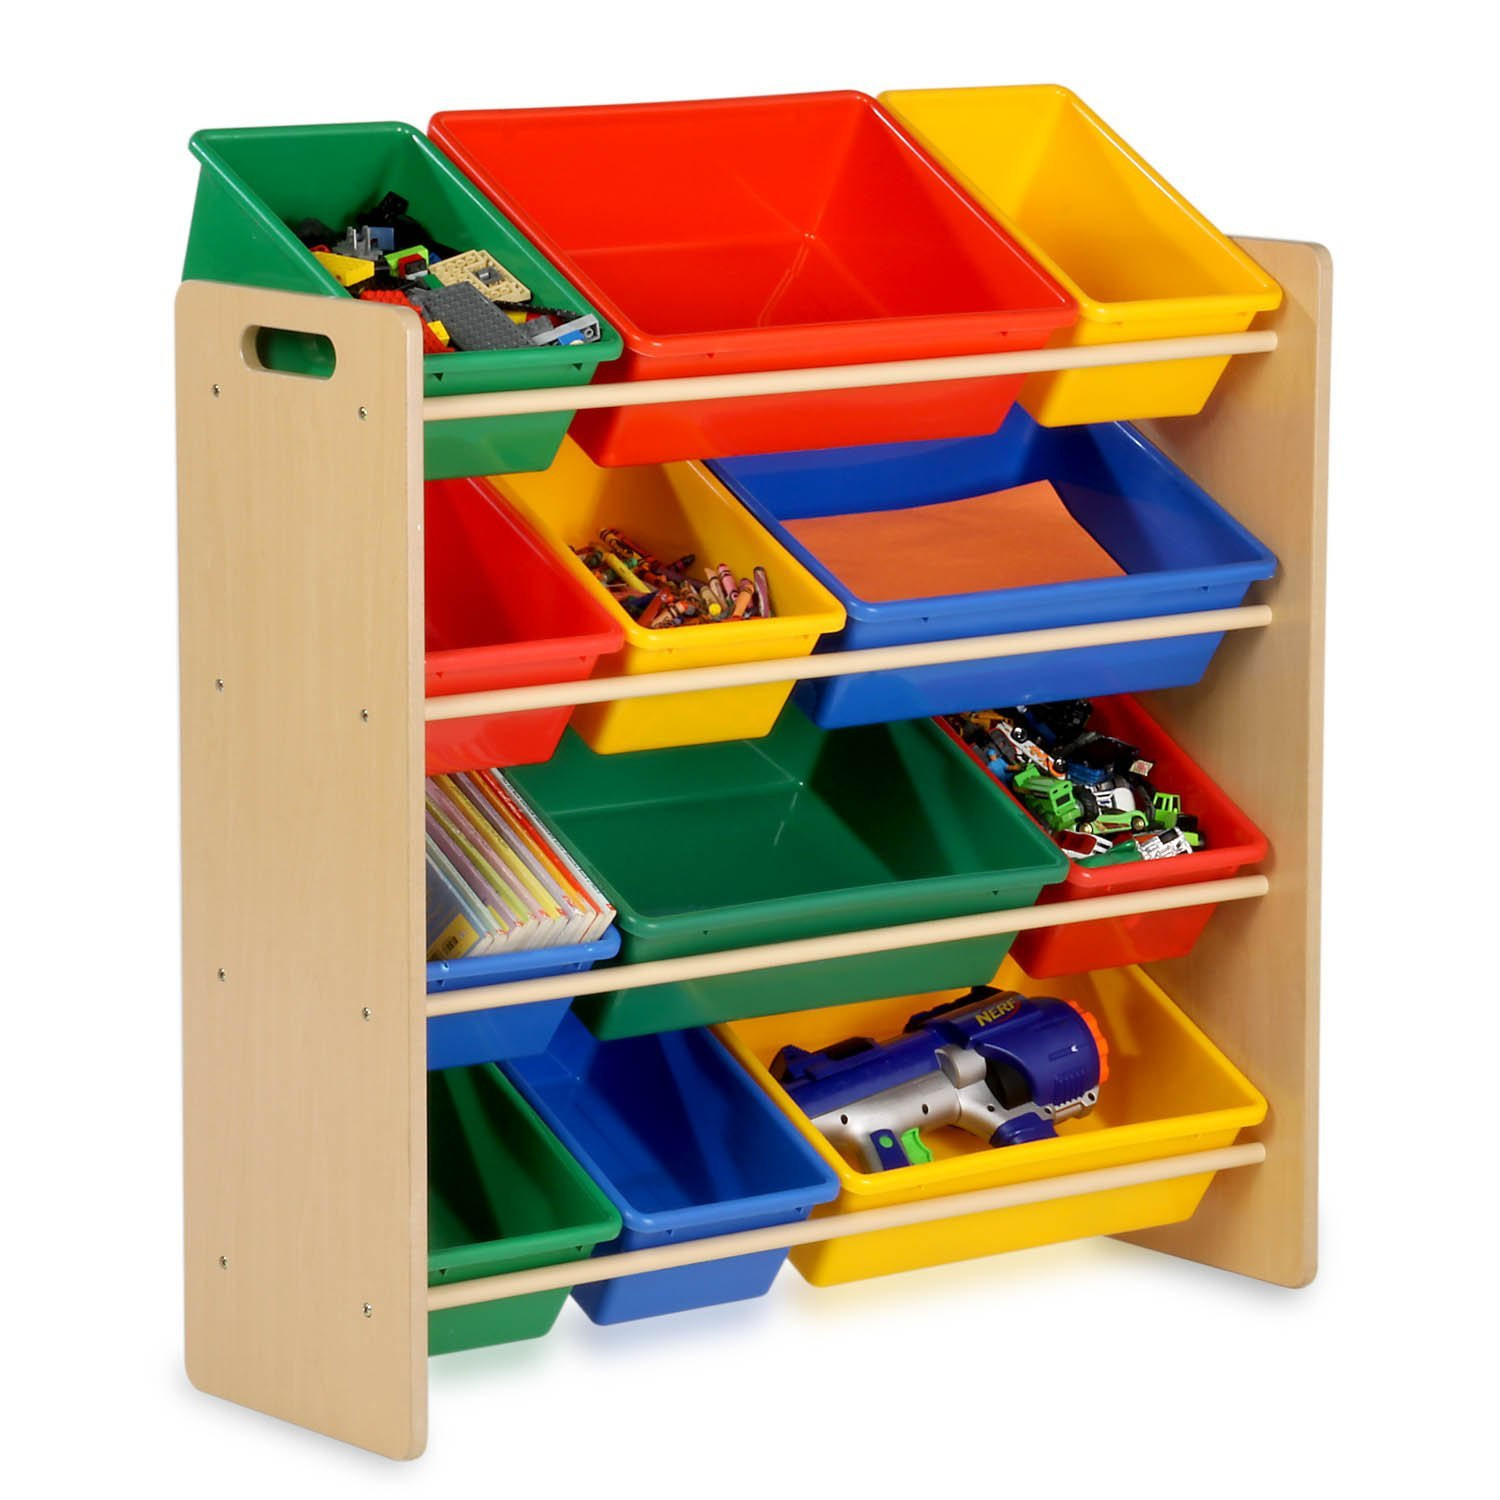 Children'S Storage Bins
 What Kind of Toy Storage Works for Small Spaces – Honey